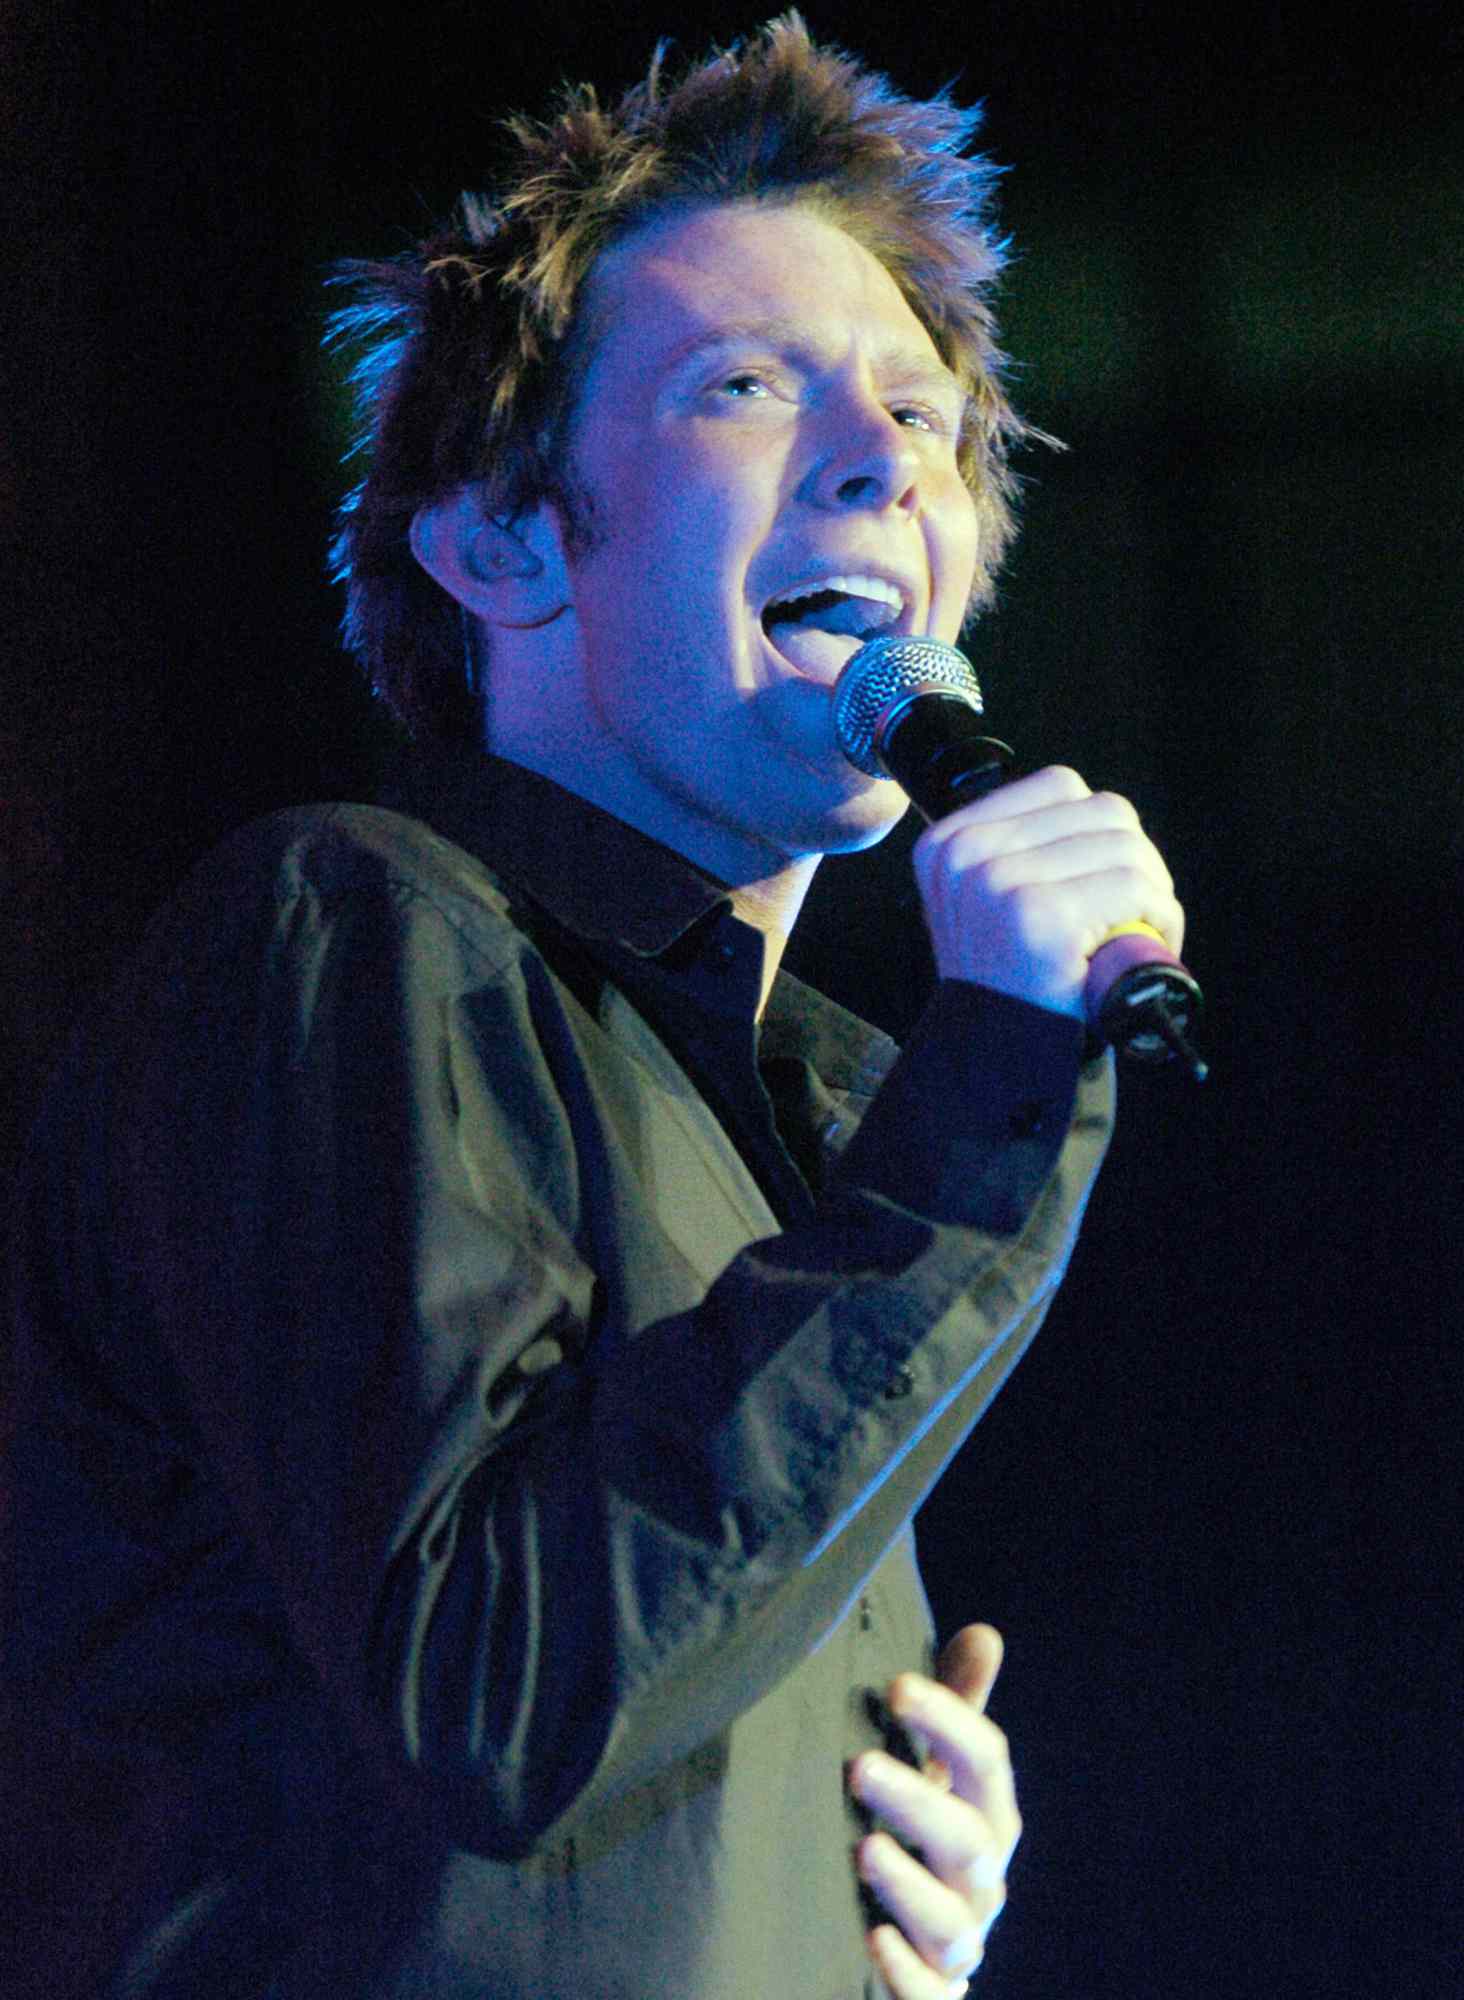 Clay Aiken performs at the KISS FM Jingle Ball 2003.